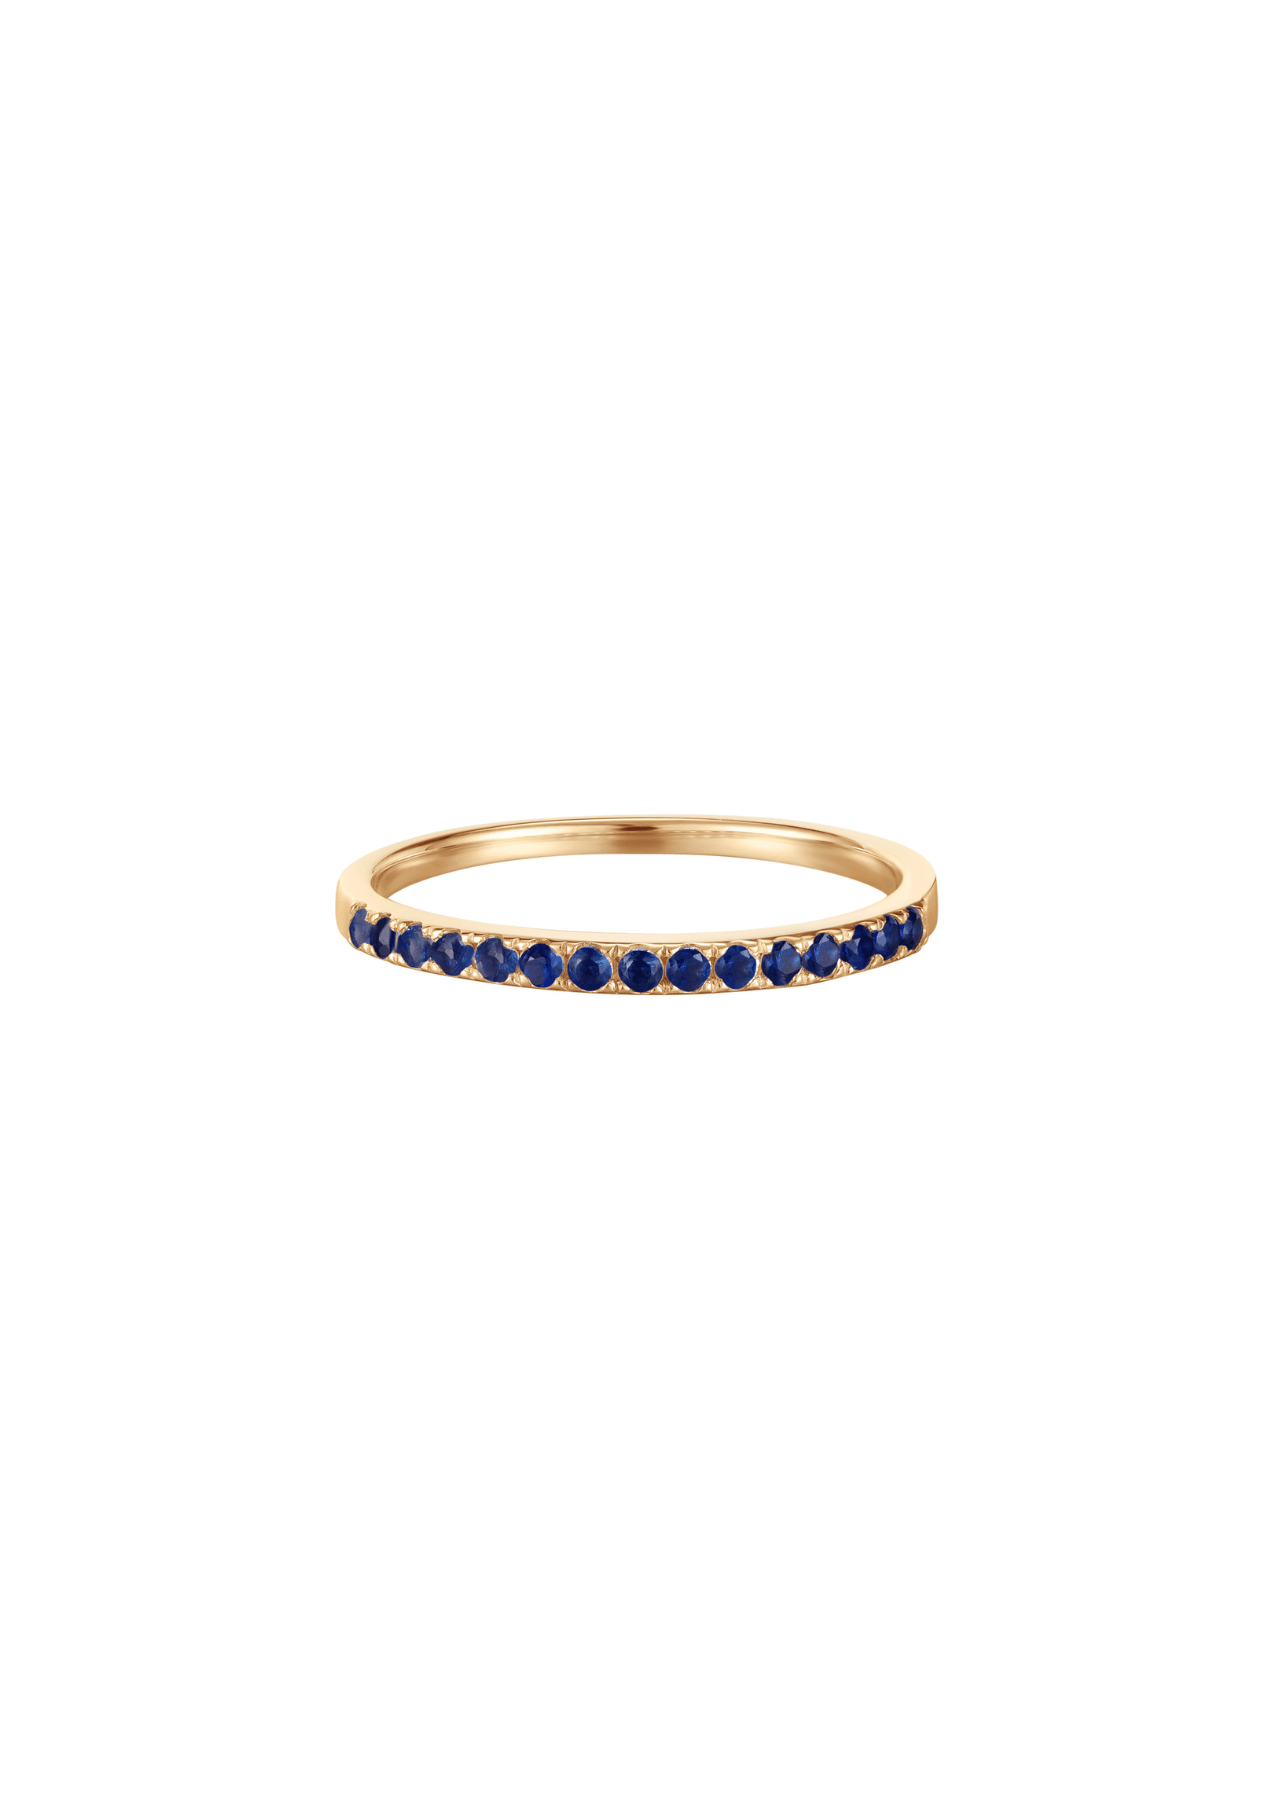 The Midnight Sapphire 14ct Solid Gold Ring - Molten Store